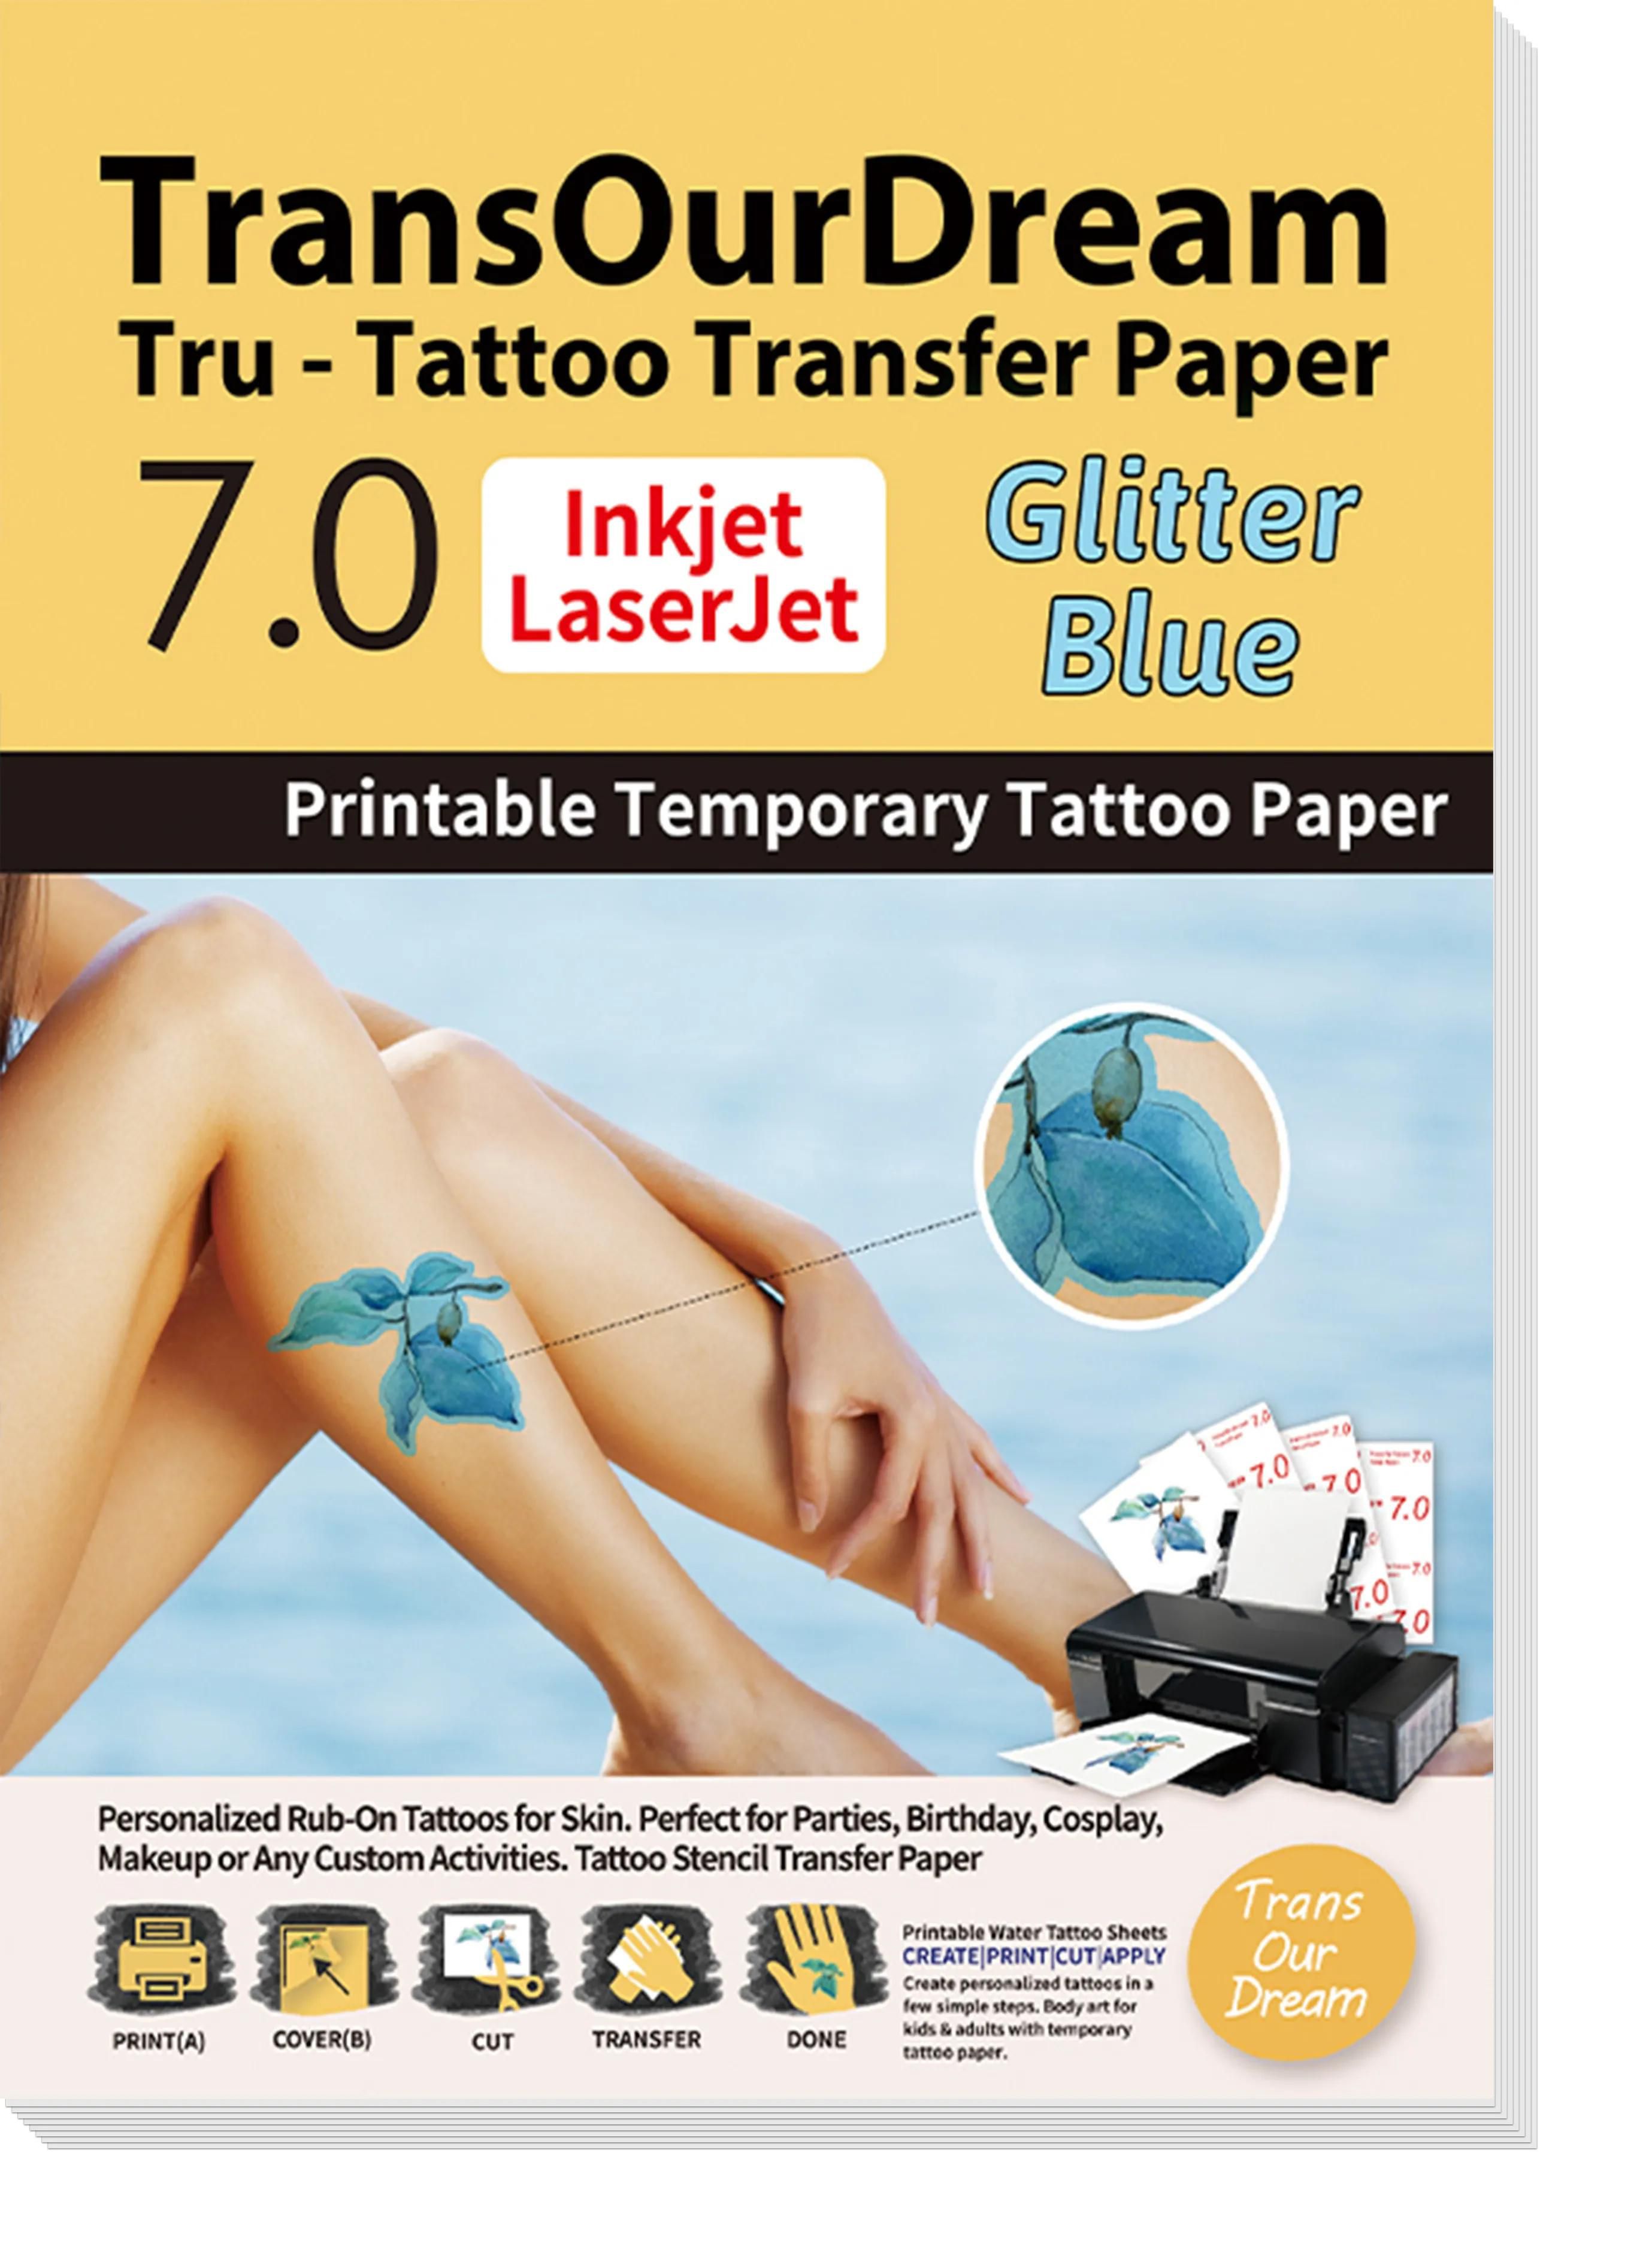 TransOurDream Printable Temporary Tattoo Transfer Paper for Inkjet & Laser Printer (A+B per Set, 5 Sets, A4 size) Glitter Blue DIY Personalized Waterproof Temporary Tattoos for Ski